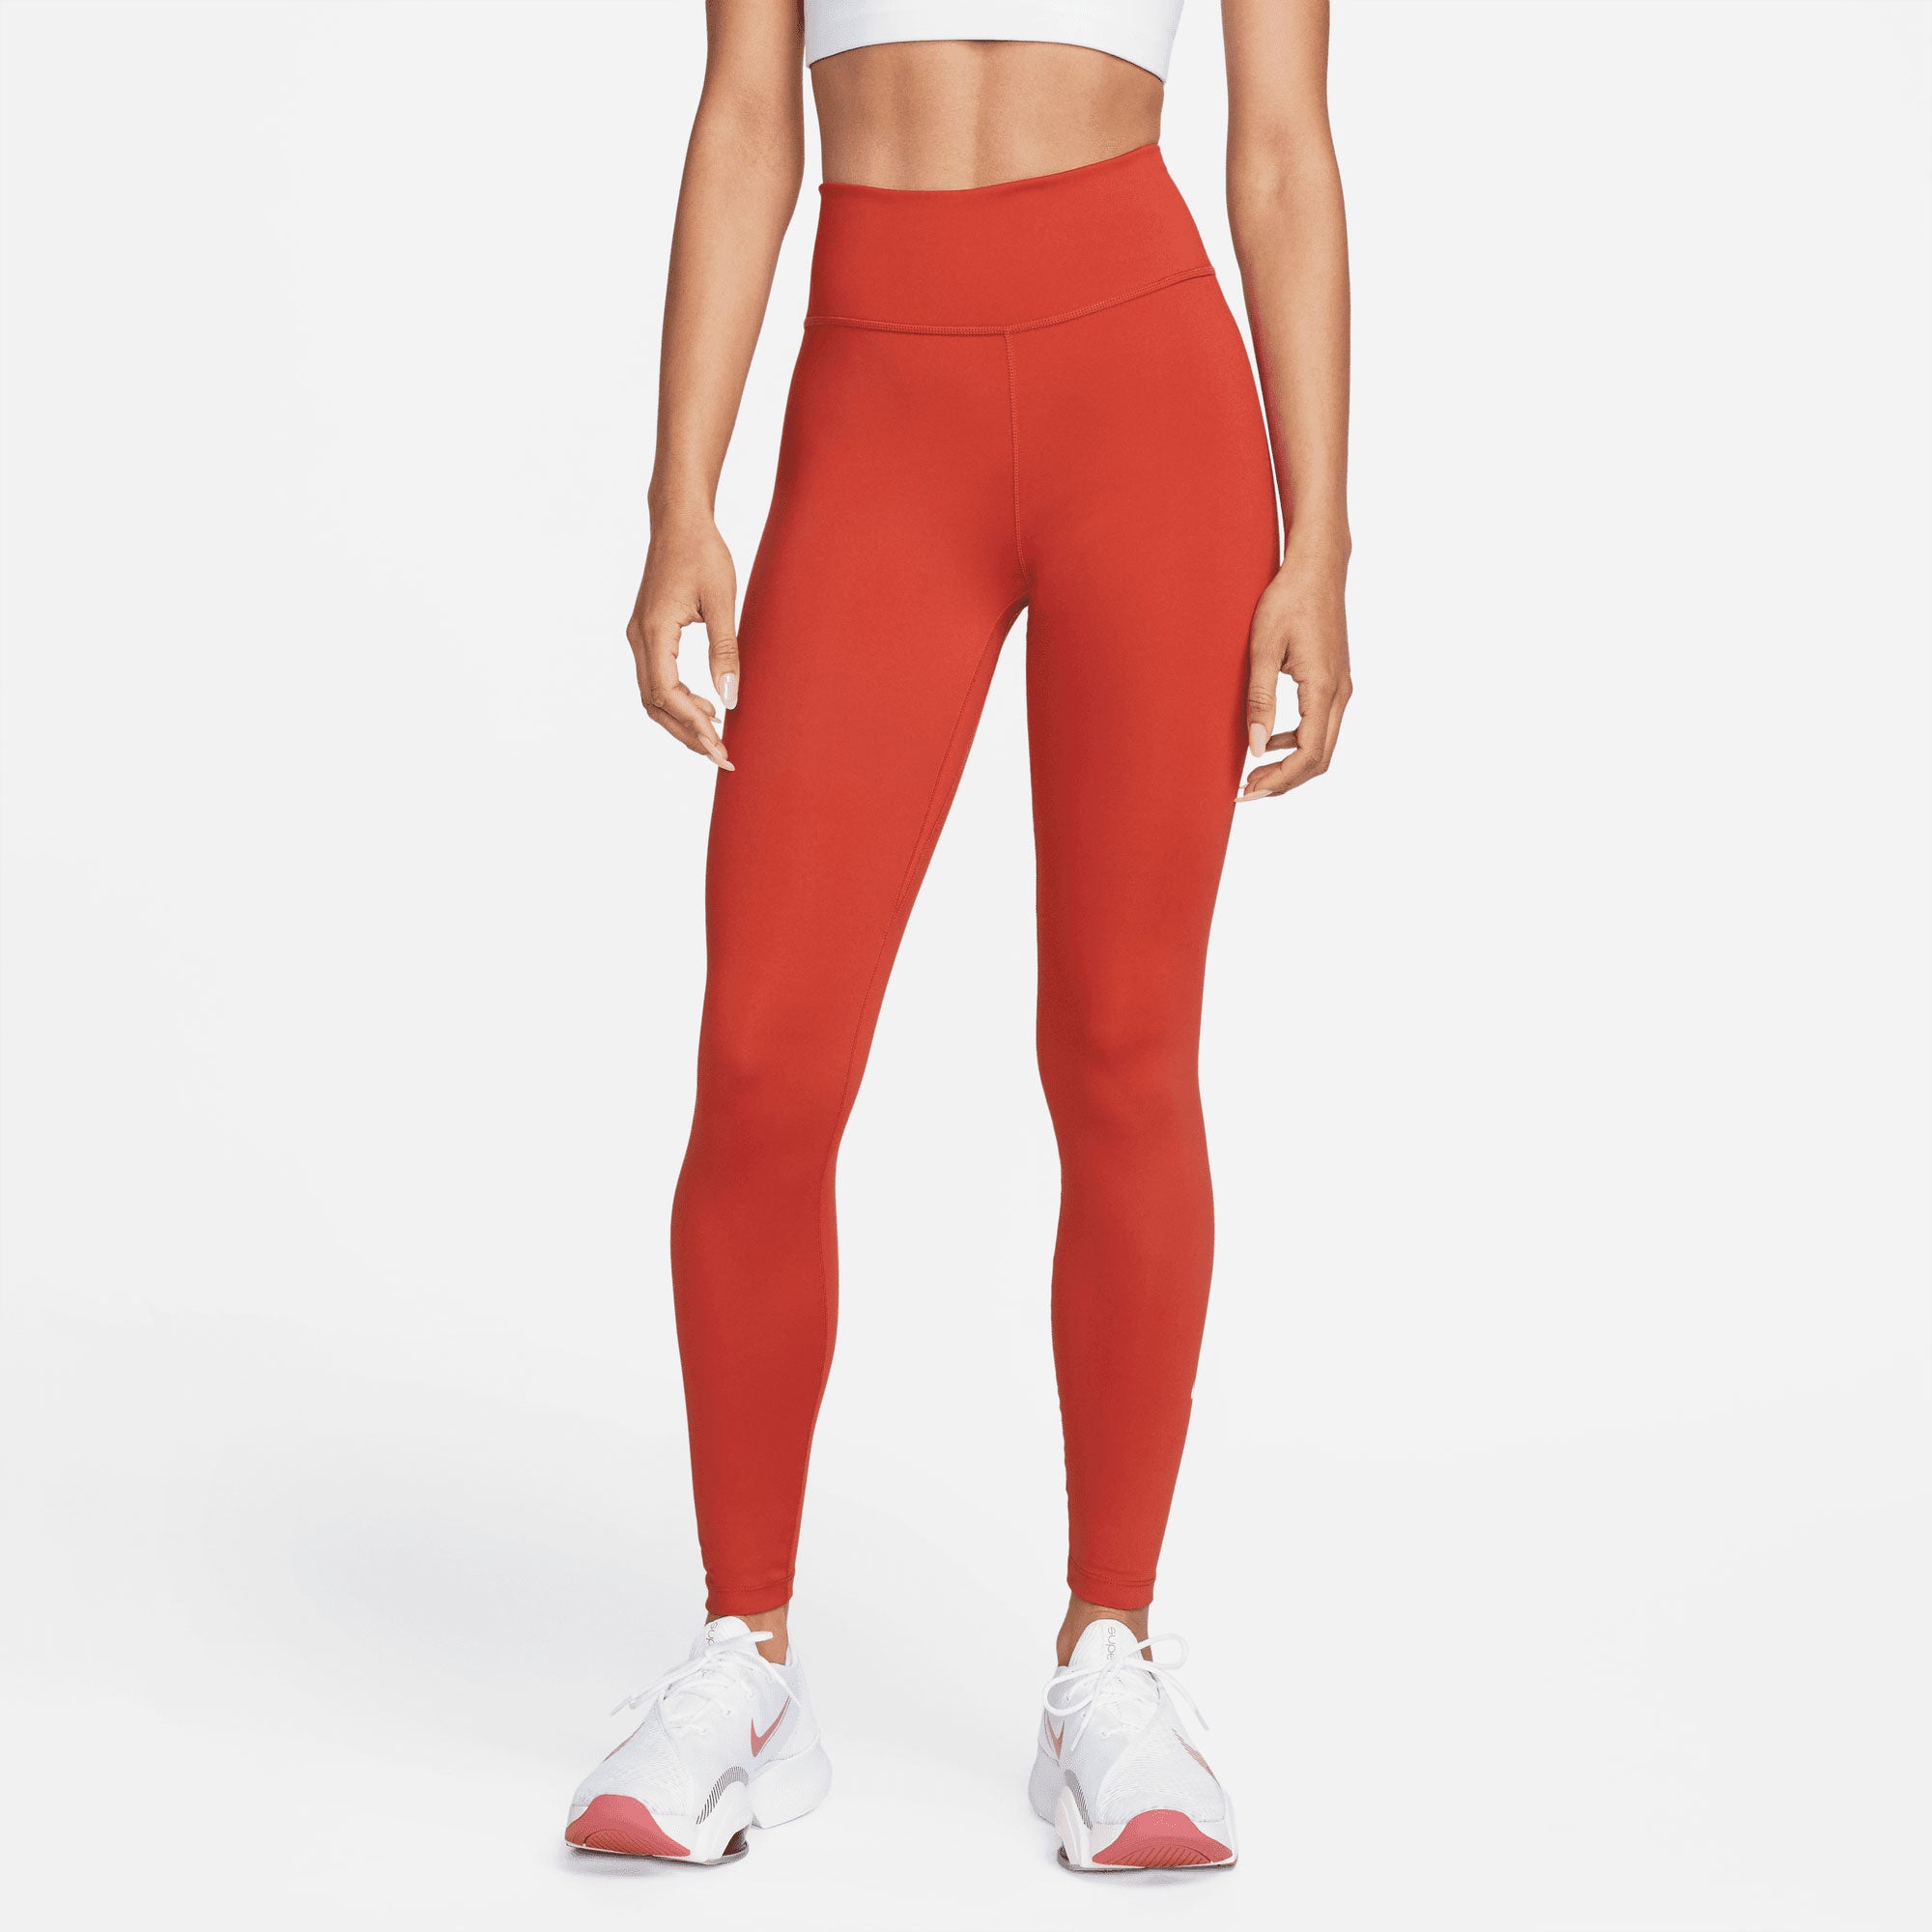 Nike One Dri-FIT Women's Mid-Rise Tights Red (1)